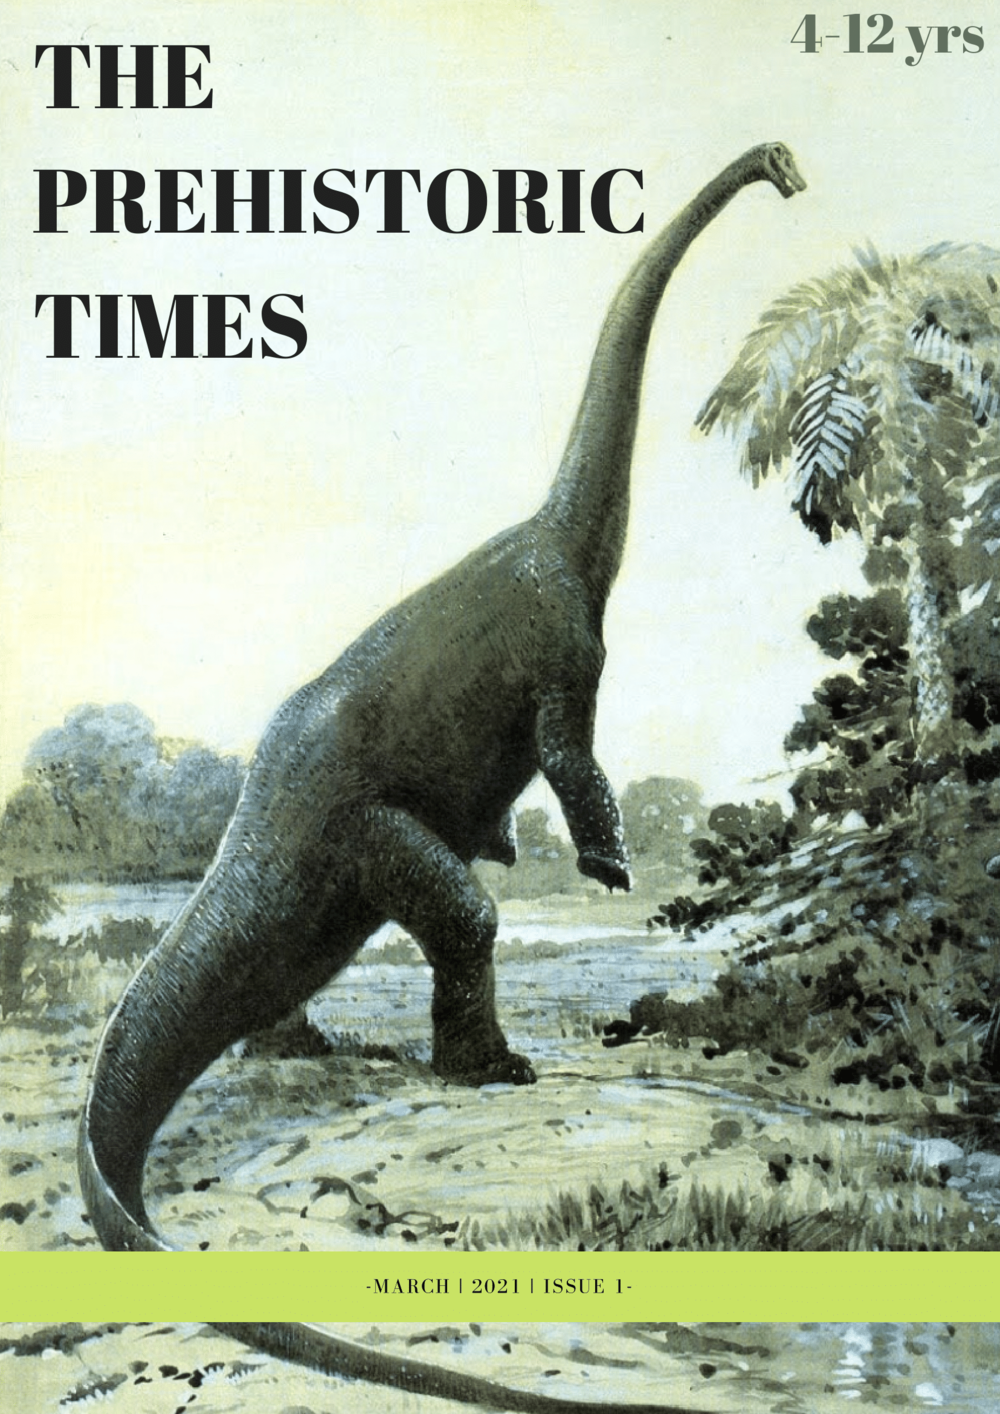 The+Prehistoric+Times-issue+1-01.png